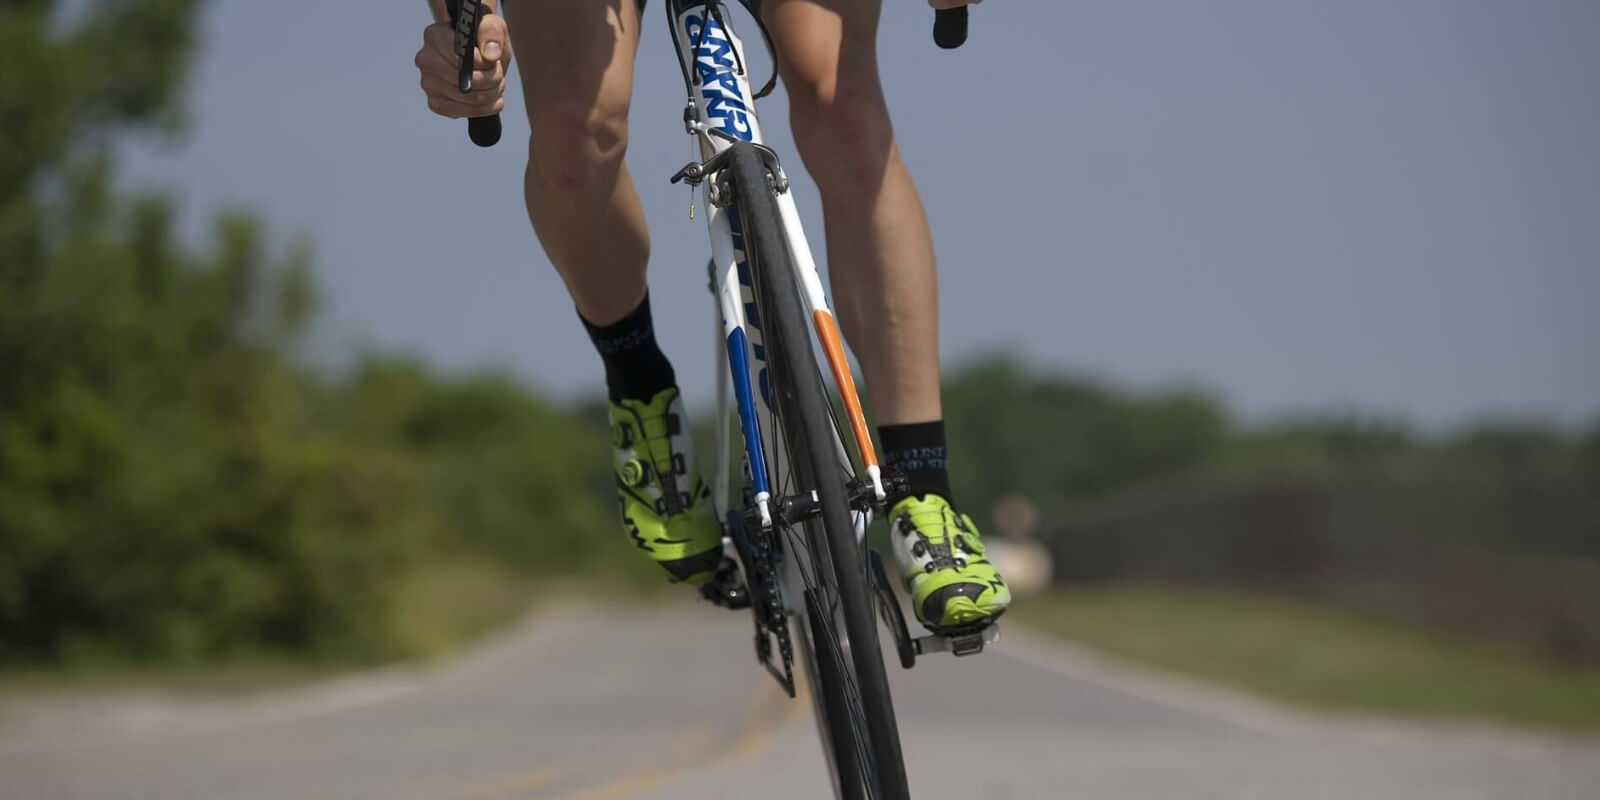 Close up of the feet of a man on a bike